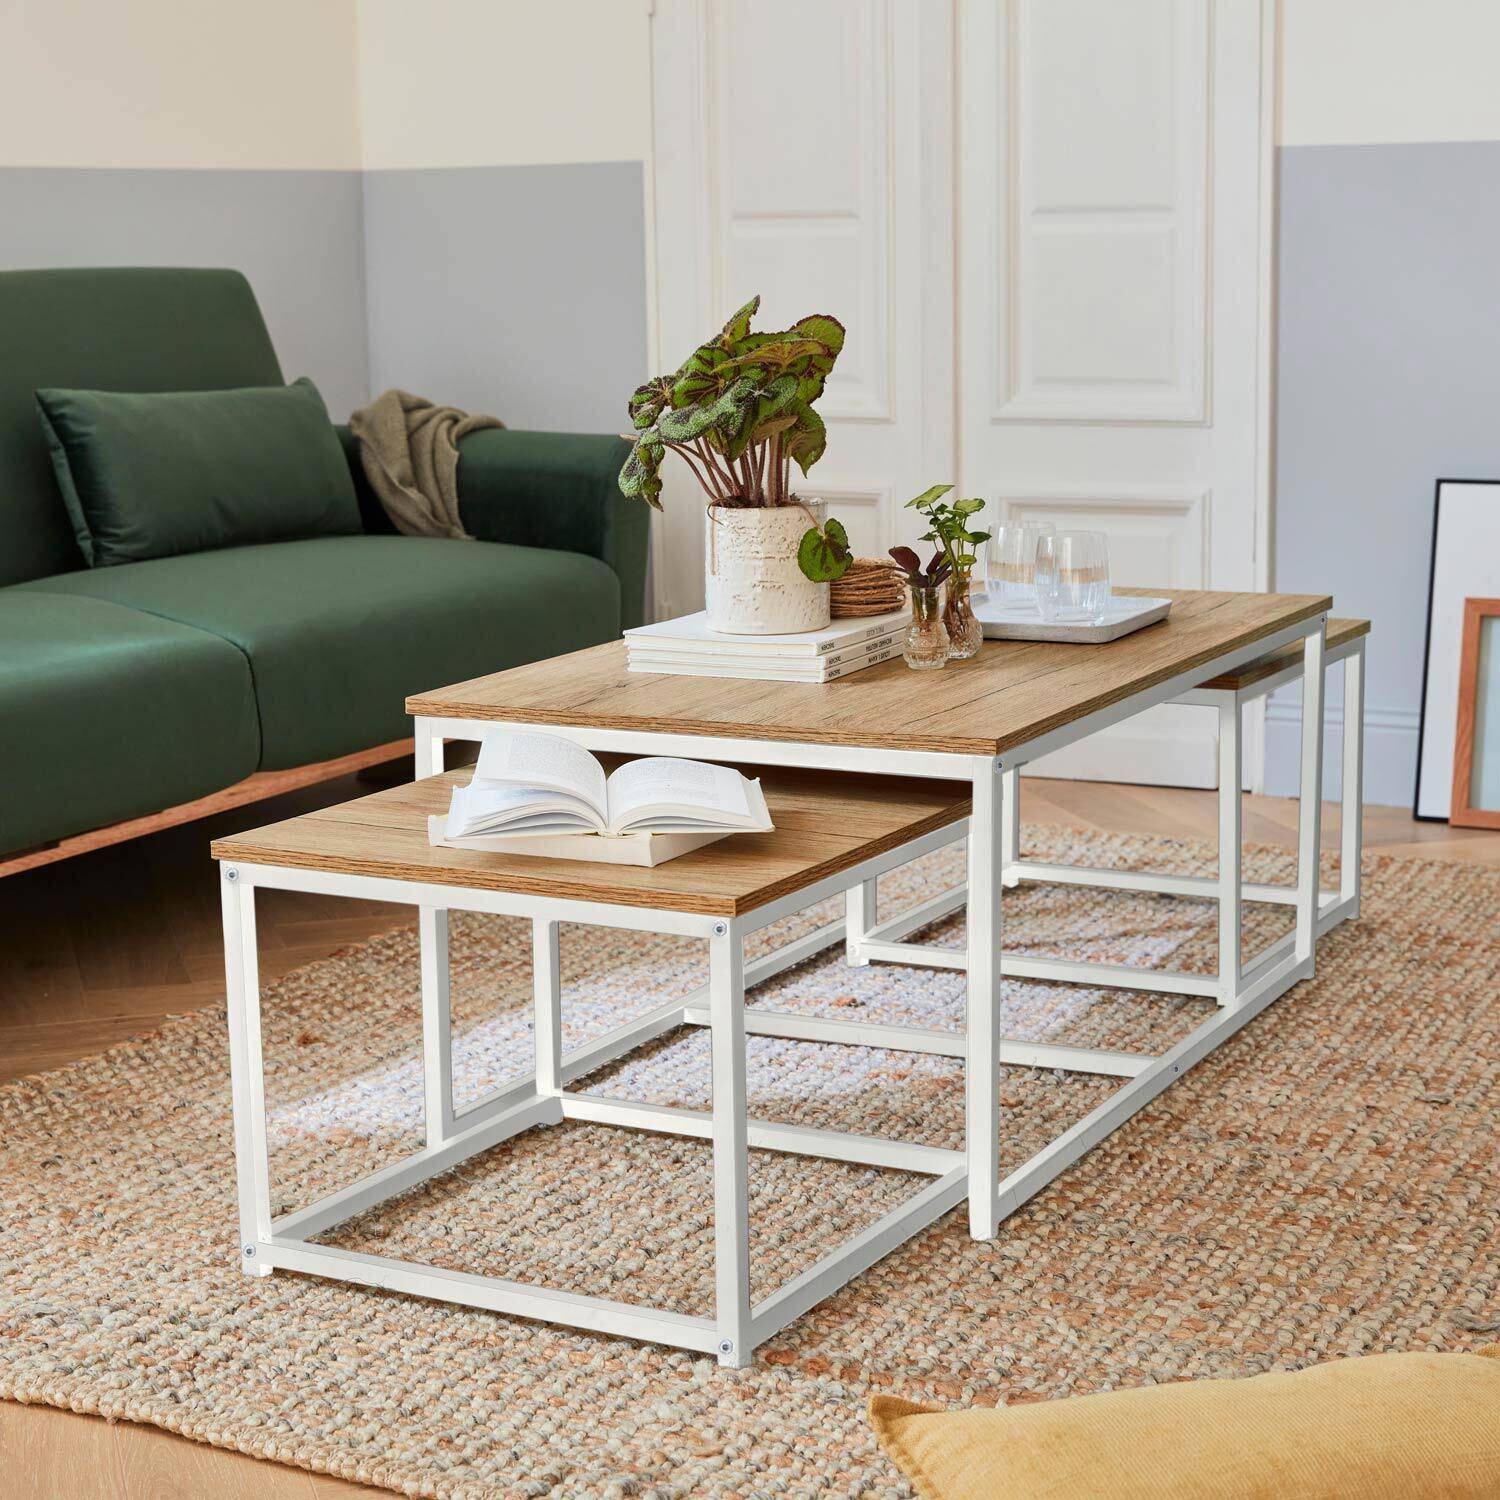 Set of 3 metal and wood-effect nesting tables, large table:100x60x45cm, 2 x small tables:50x50x38cm - Loft - White,sweeek,Photo1